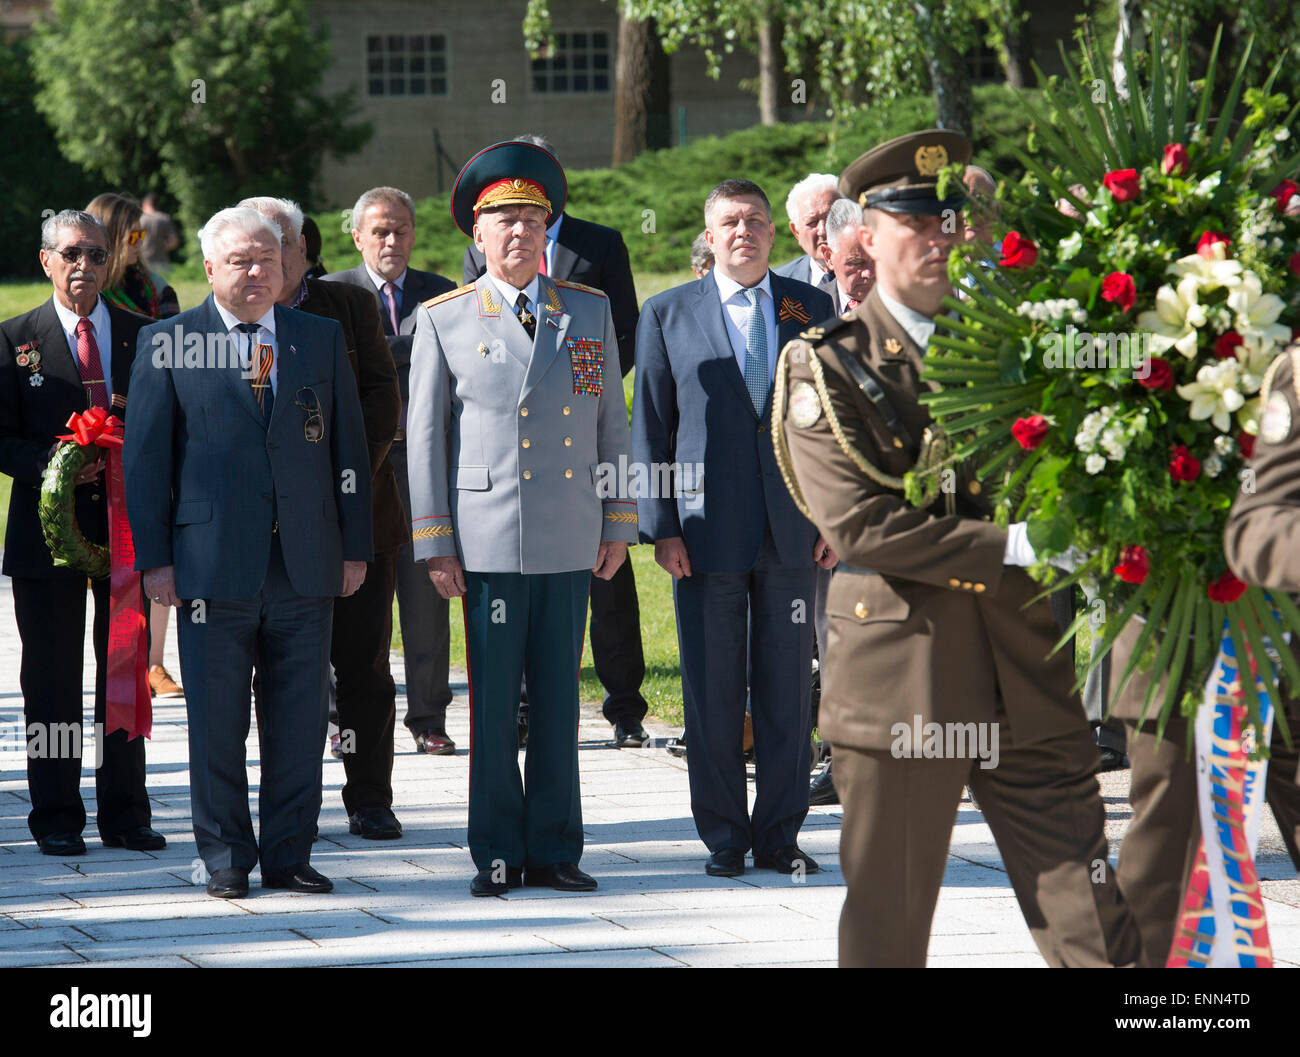 Zagreb, Croatia. 8th May, 2015. Members of Russian anti-fascist delegation lay a wreath at the Tomb of the People's Heroes at the Mirogoj cemetery in Zagreb, Croatia, May 8, 2015. A memorial service was held in Croatia to mark the Victory over Fascism Day and Liberation of Zagreb Day. © Miso Lisanin/Xinhua/Alamy Live News Stock Photo